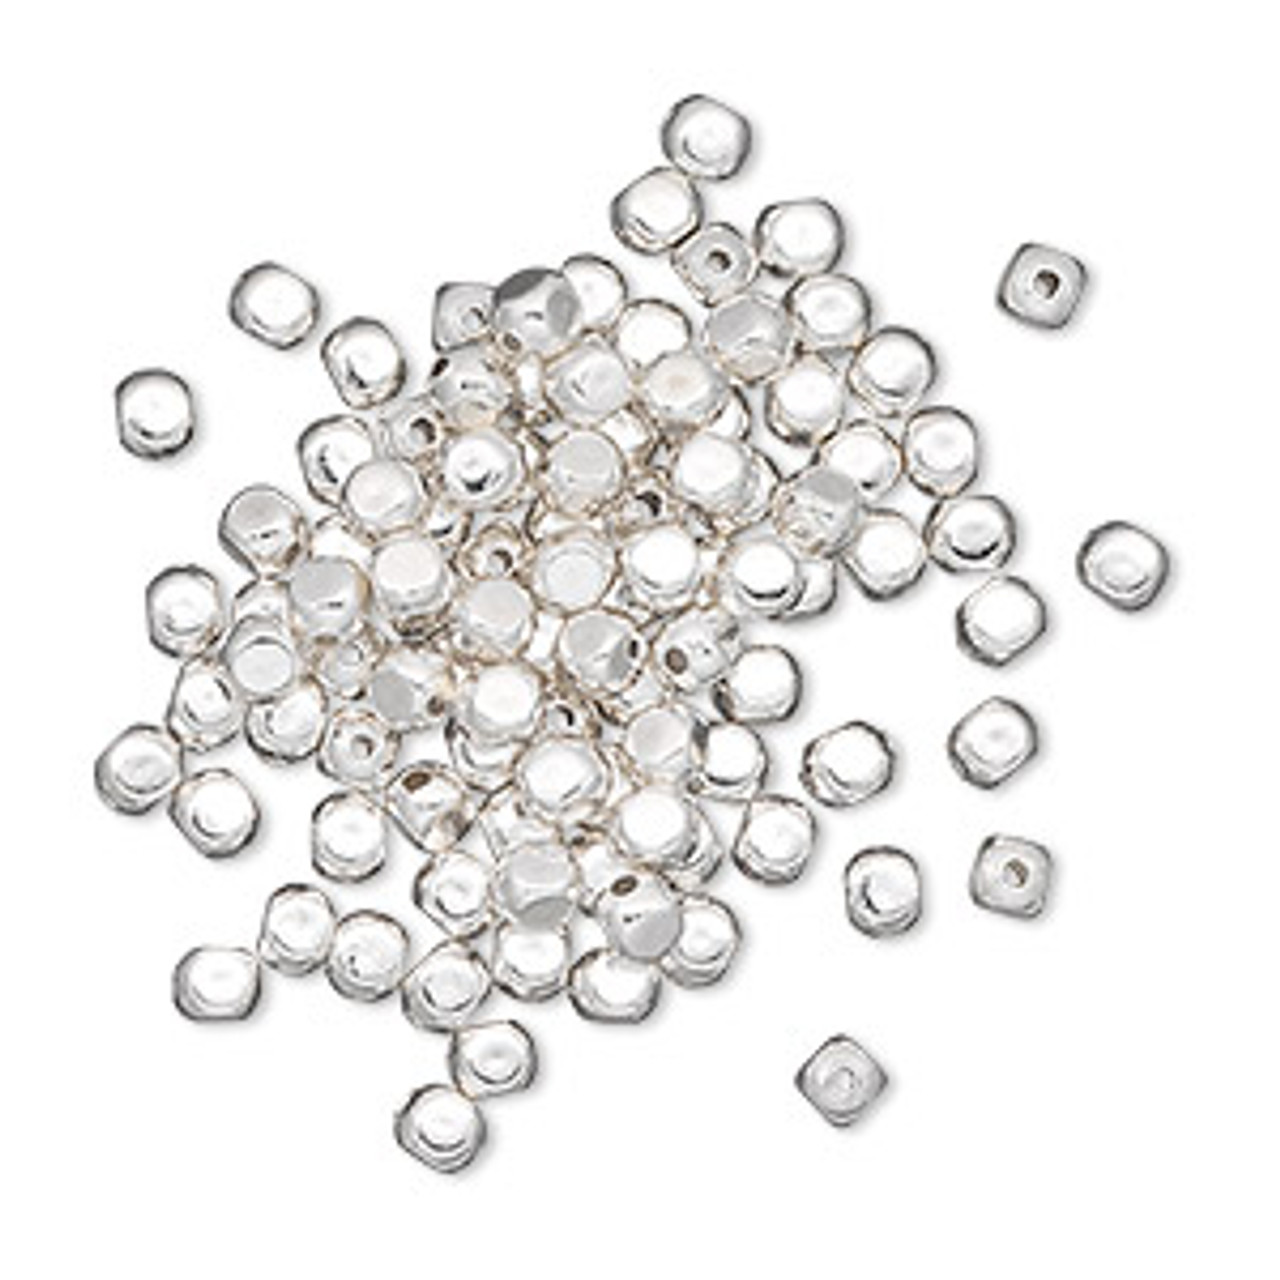 3mm Rounded Square Metal Beads Silver Plated (100 Beads)